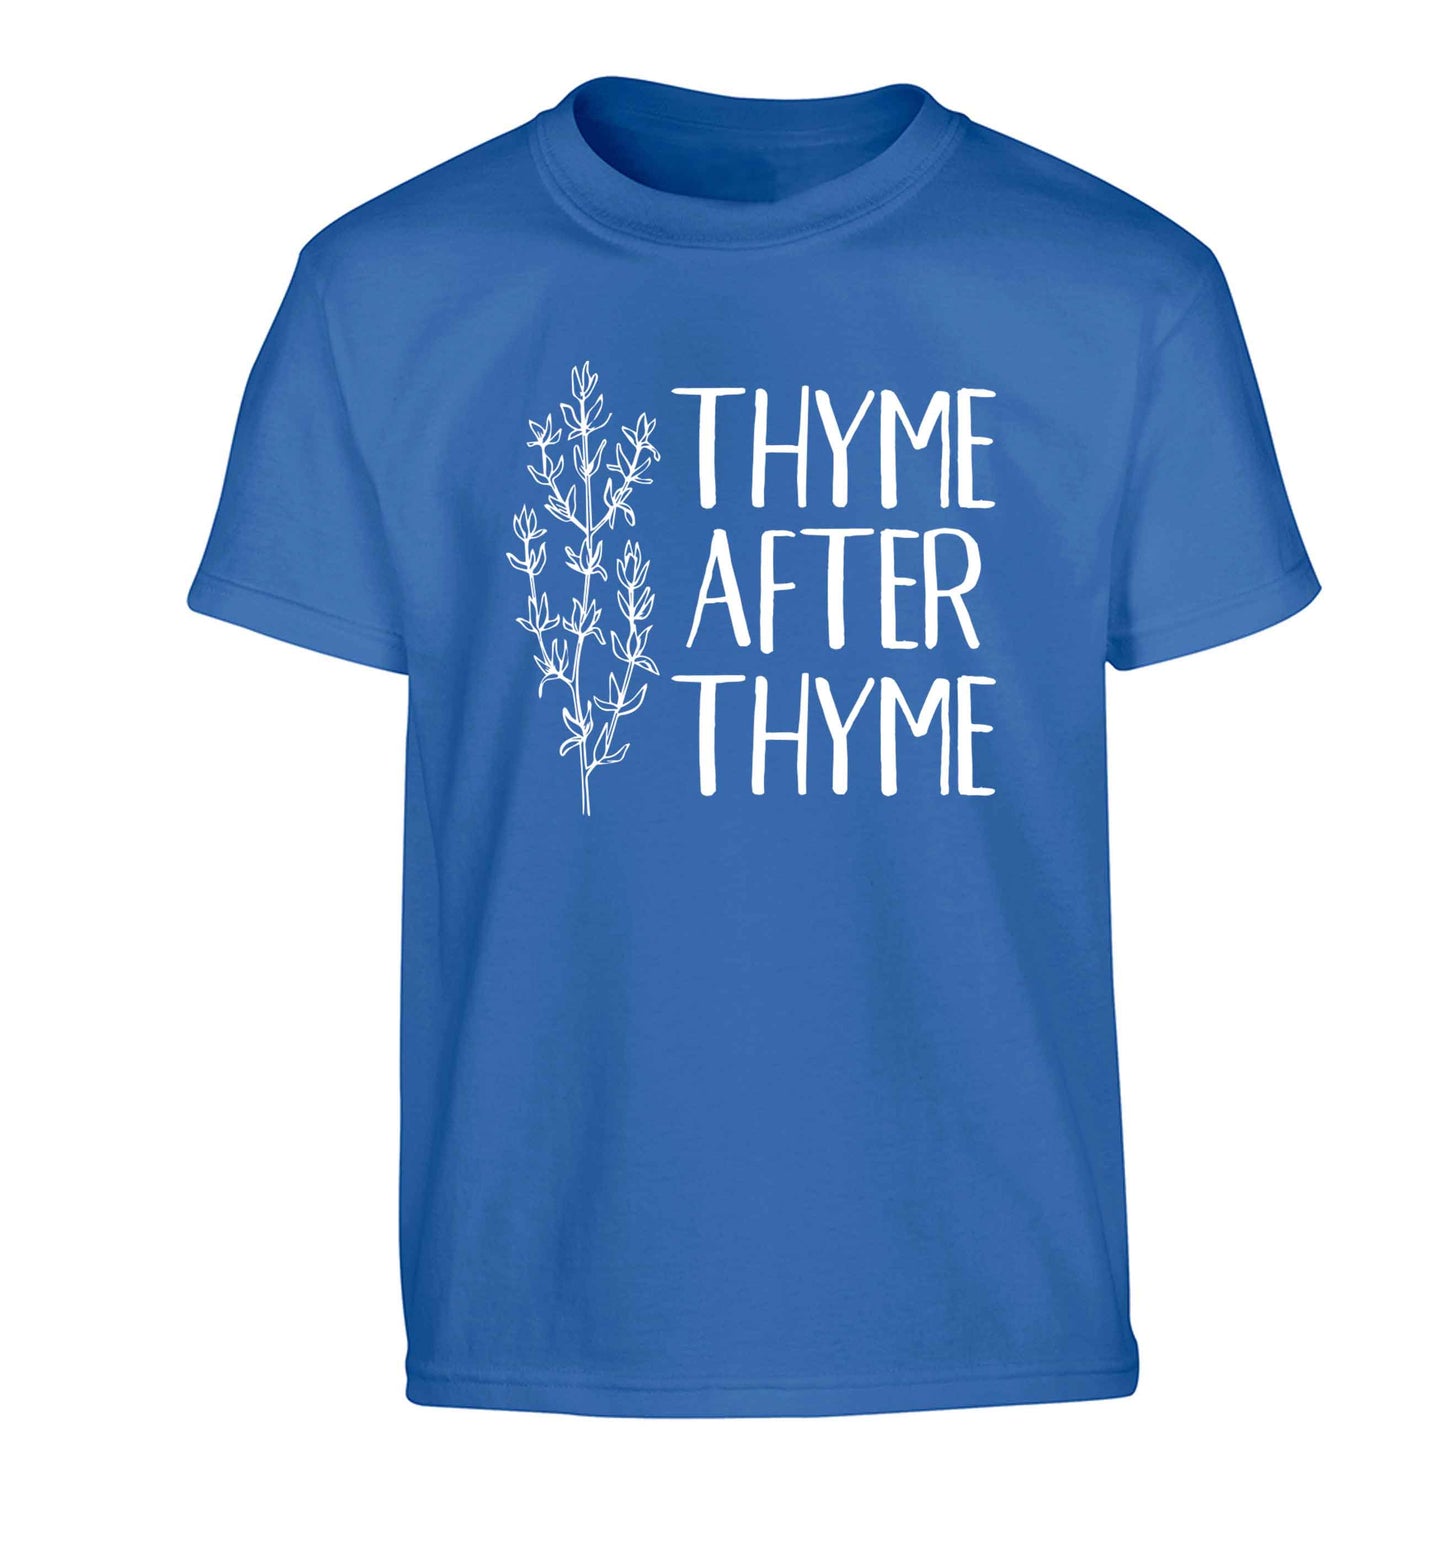 Thyme after thyme Children's blue Tshirt 12-13 Years